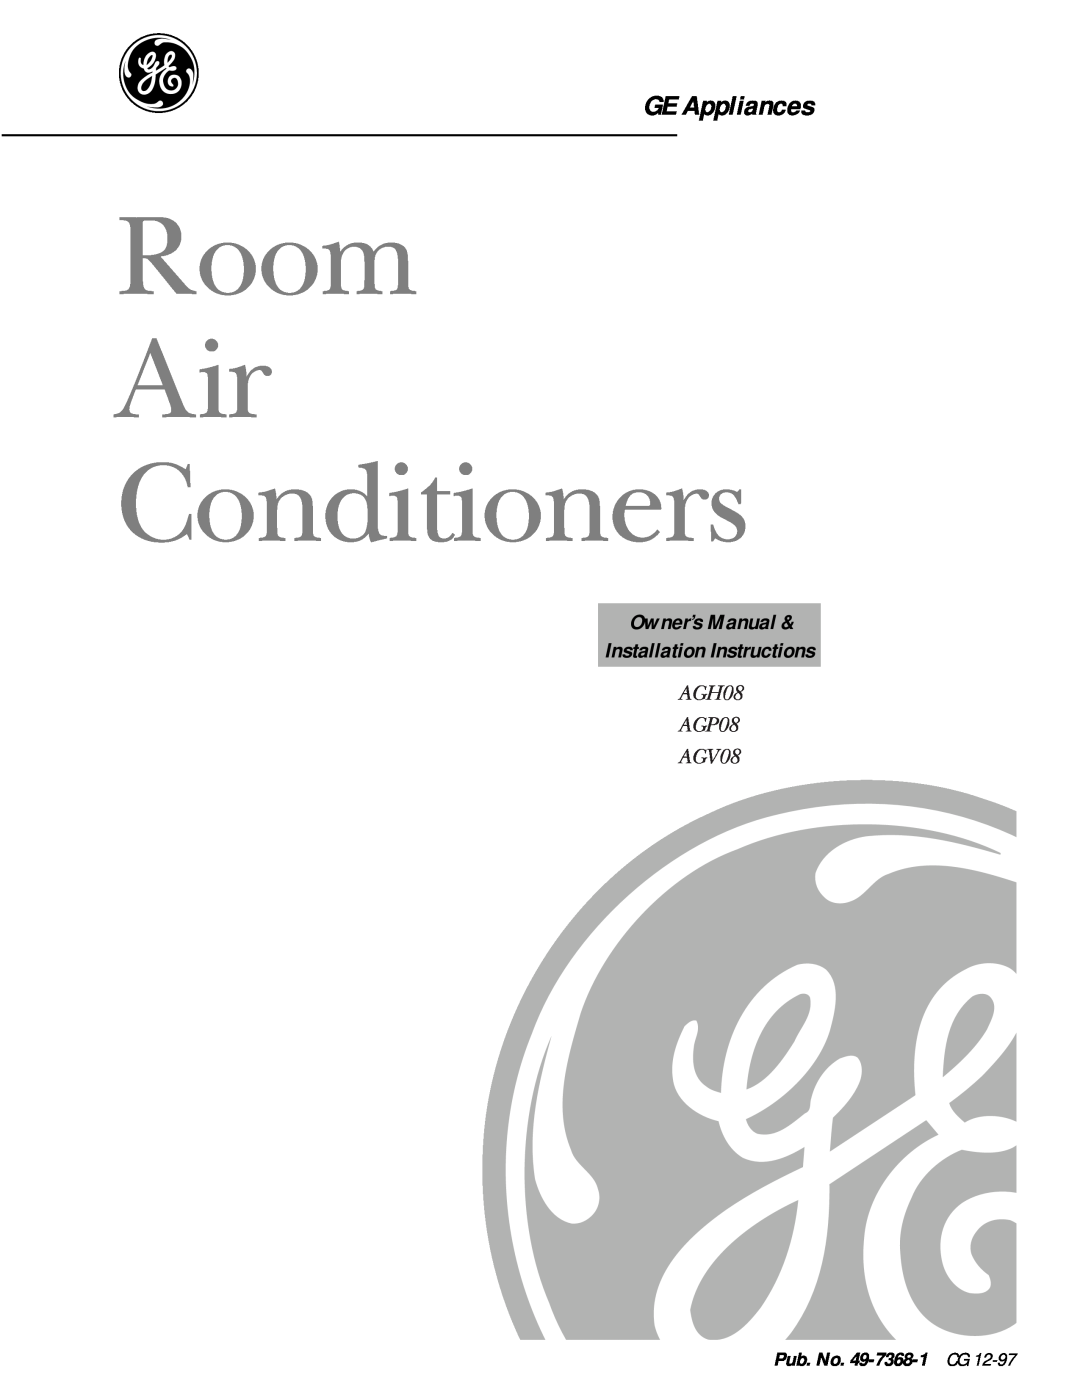 GE owner manual Pub. No. 49-7368-1 CG, Room Air Conditioners, GE Appliances, AGH08 AGP08 AGV08 